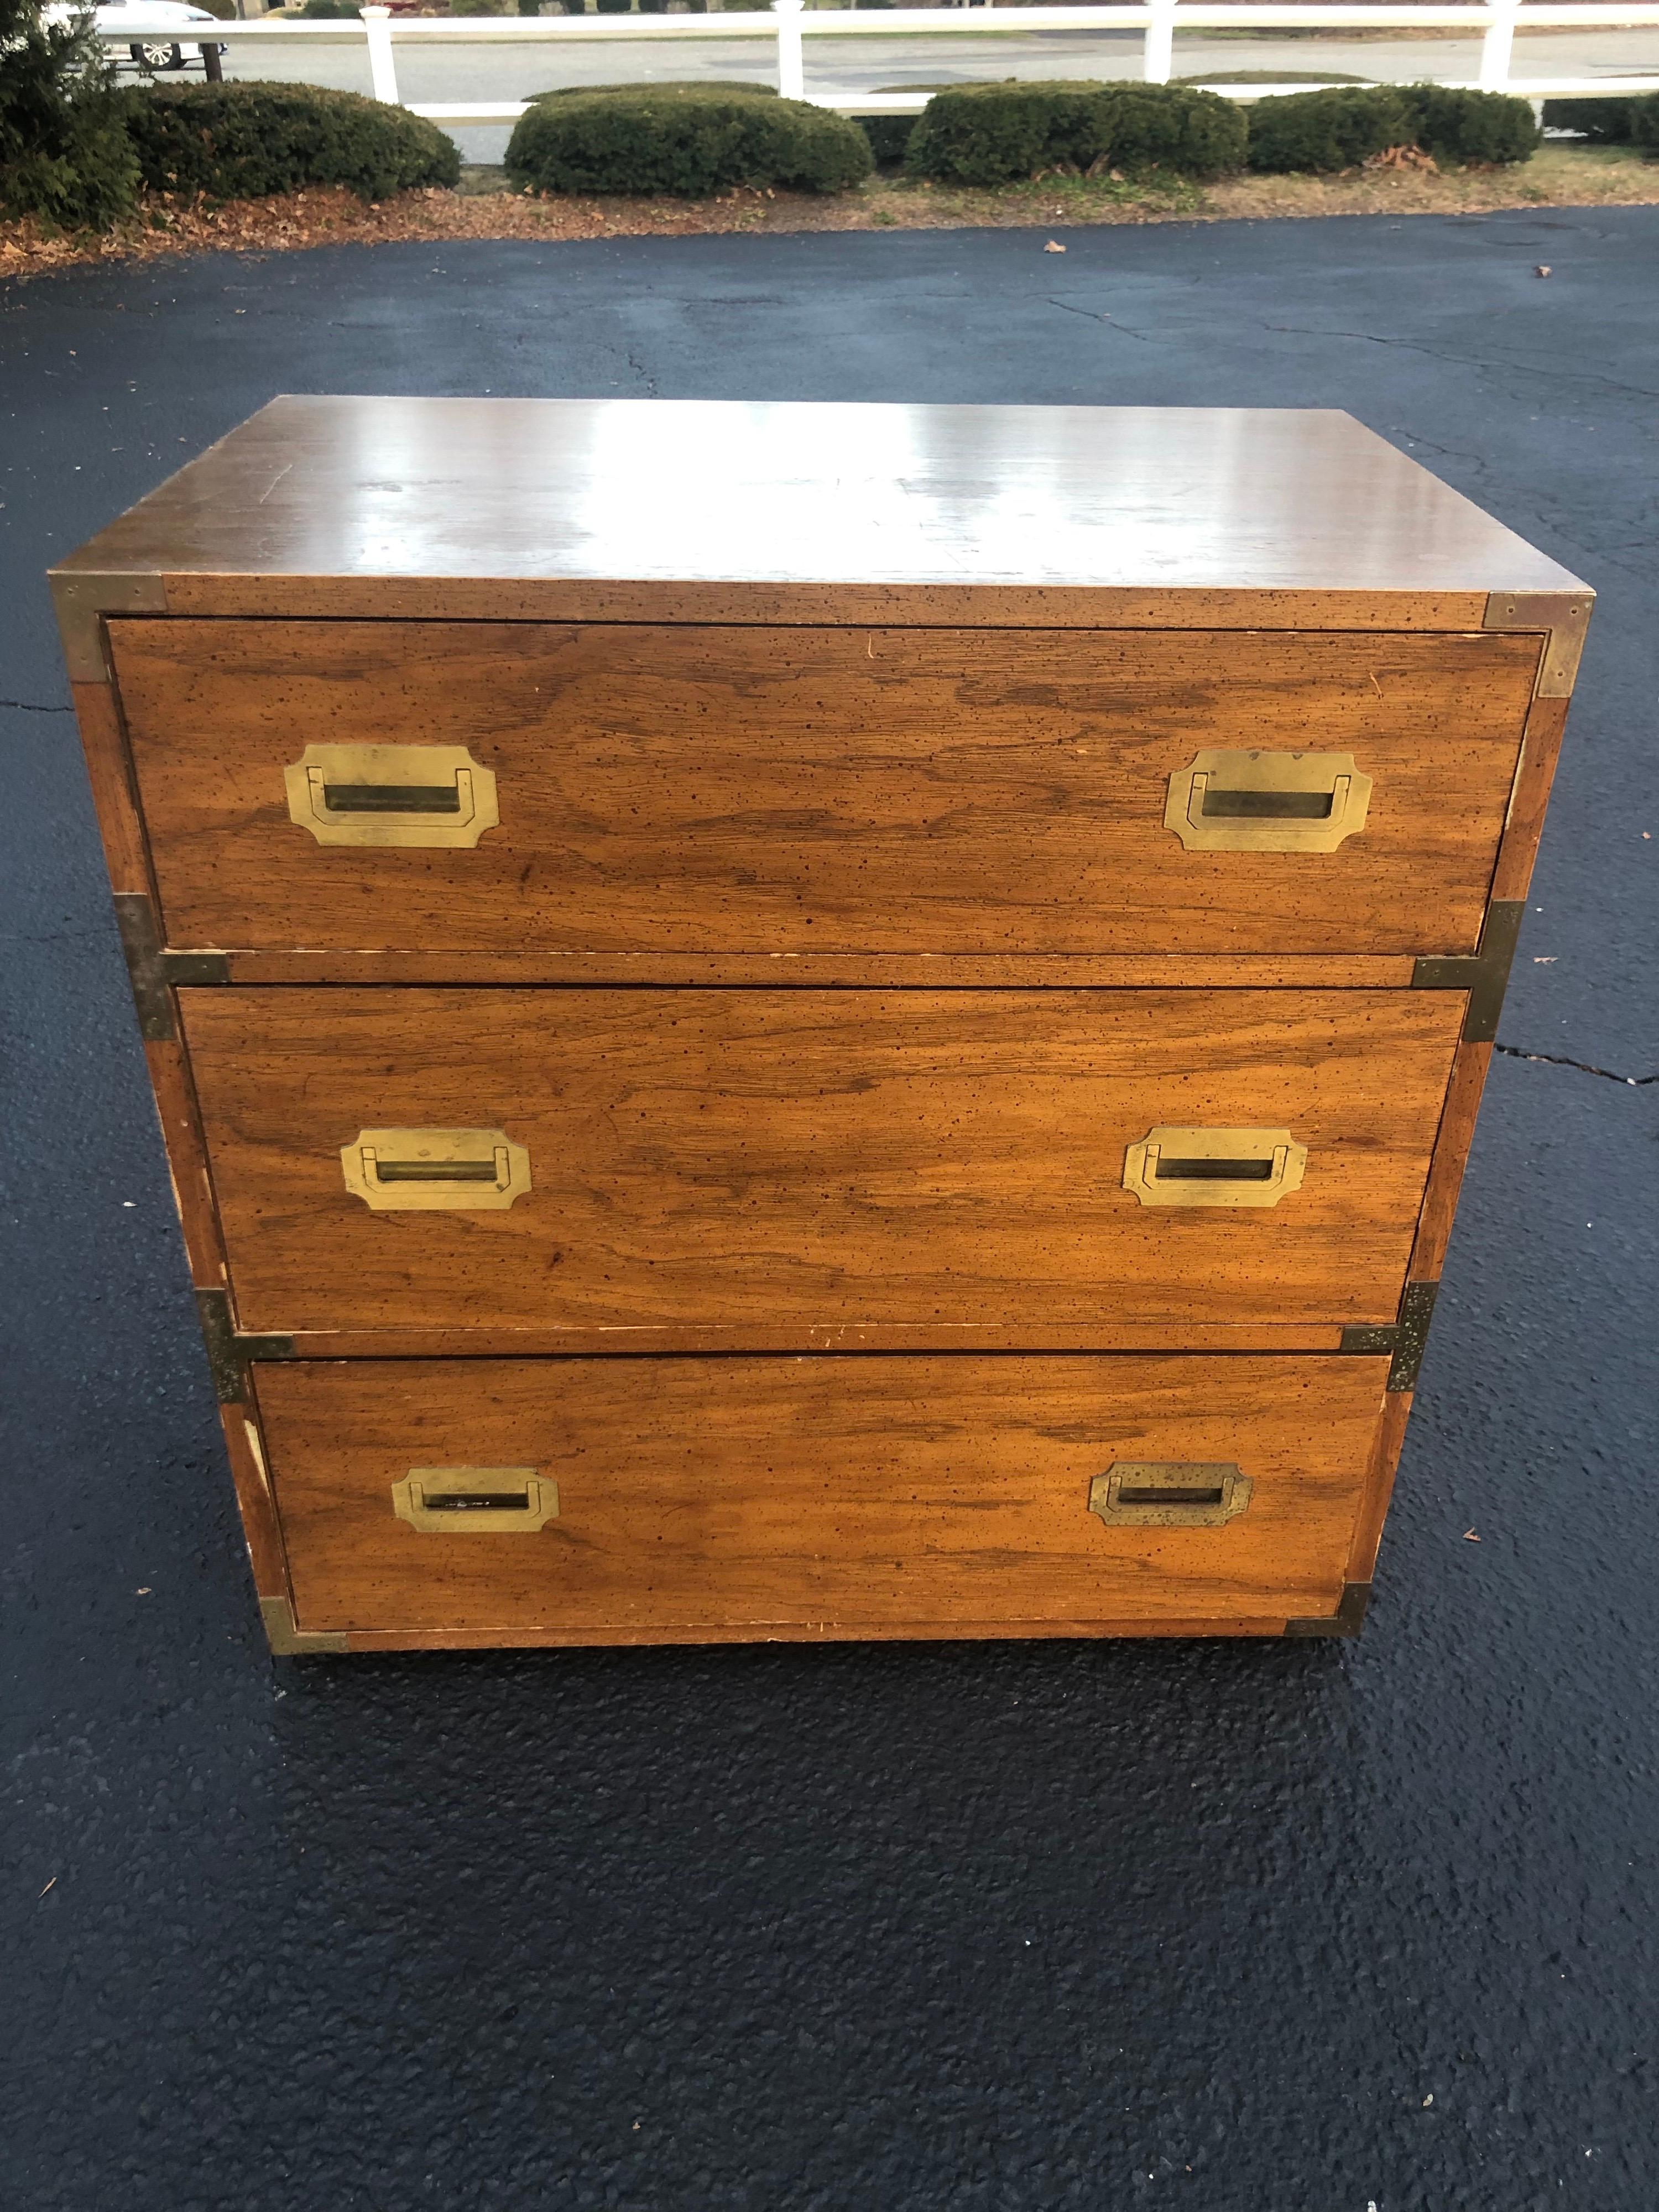 Mid-century campaign chest. Classic, timeless piece which will never go out of style. Heavy solid wood construction with a veneer overlay. No signature found but in the style of Henredon. Three drawers give ample storage but this is a nice